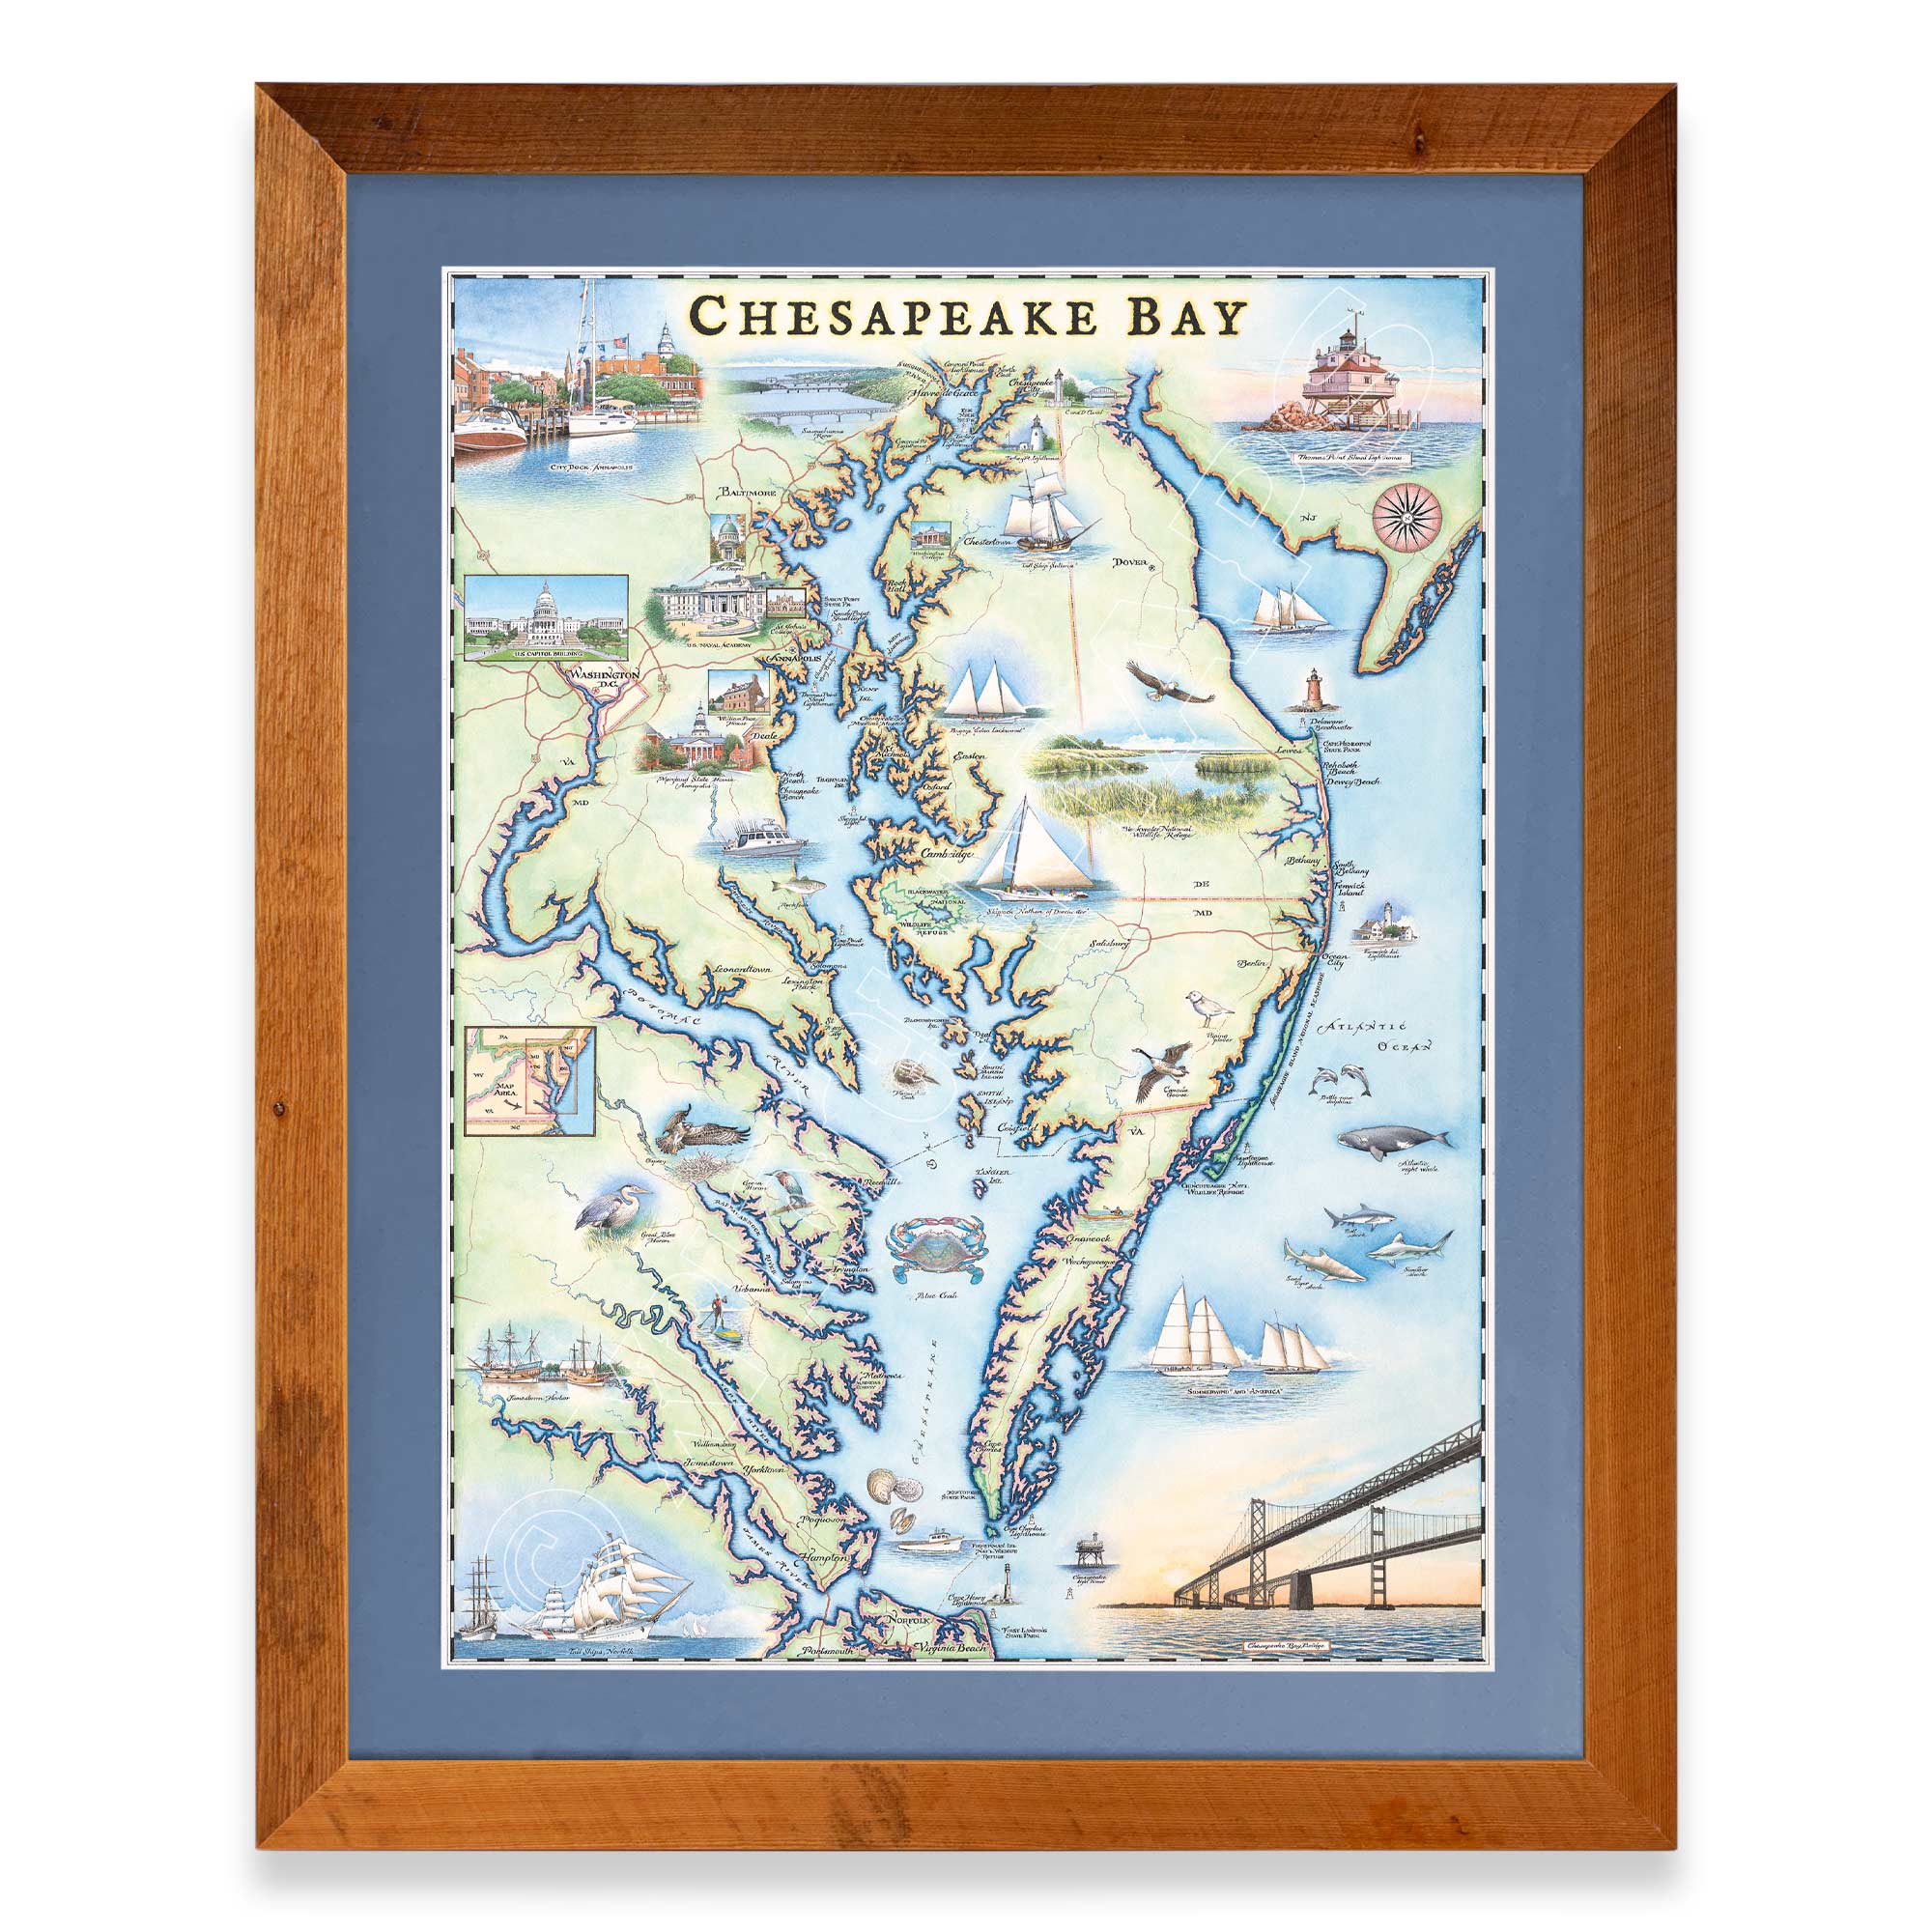 Chesapeake Bay hand-drawn map in a Montana Flathead Lake reclaimed larch wood frame and blue mat. 